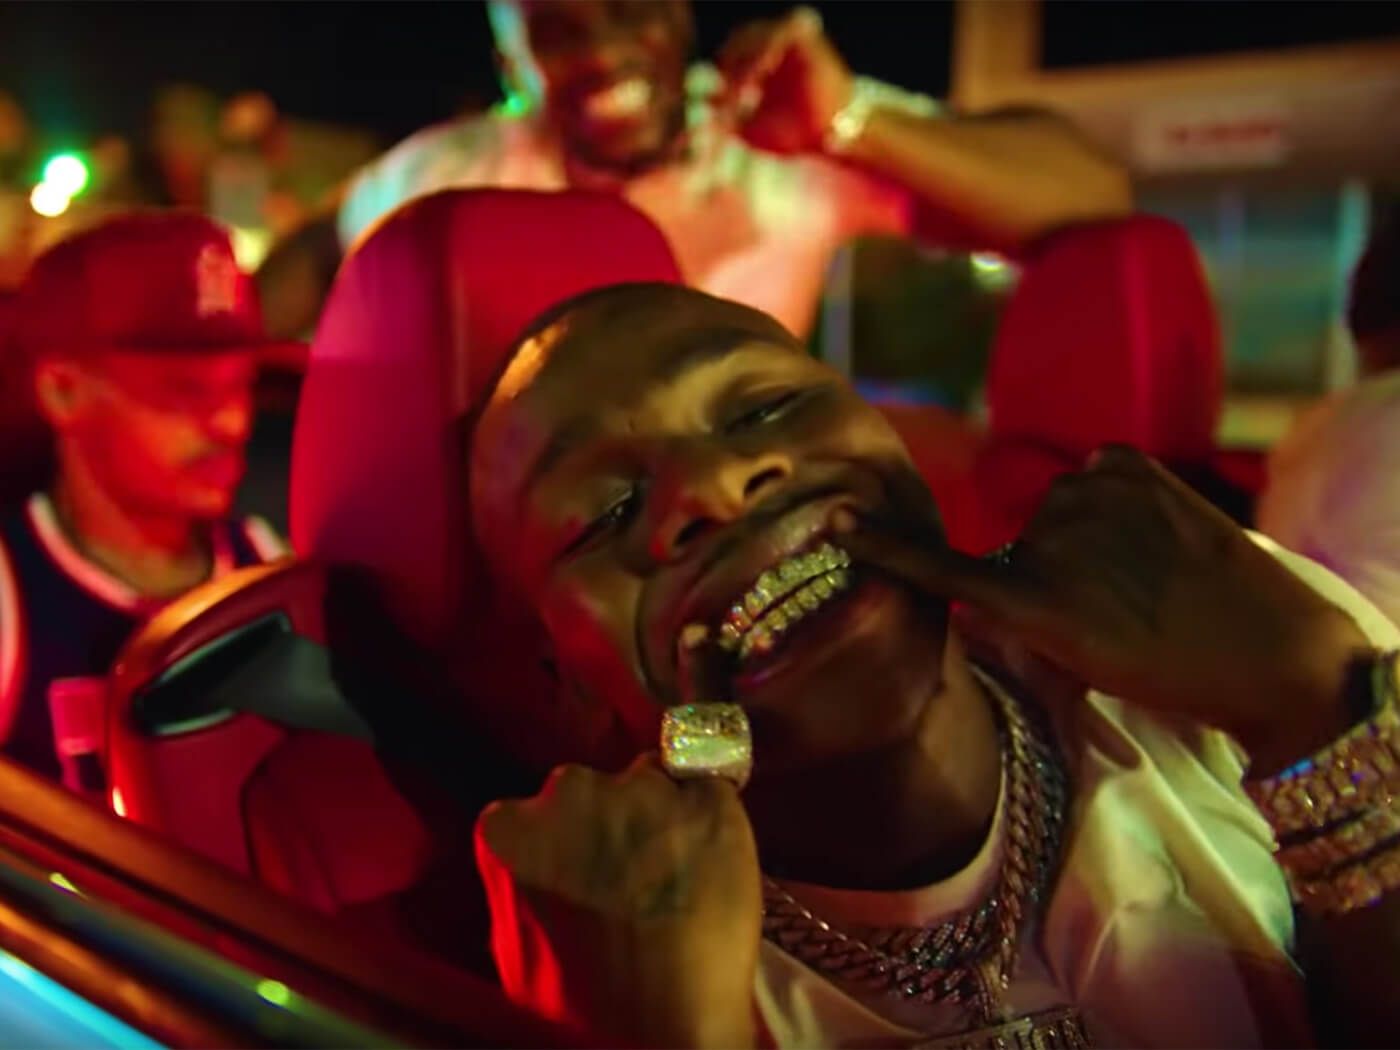 DaBaby cruises down the highway in “Off da Rip” video